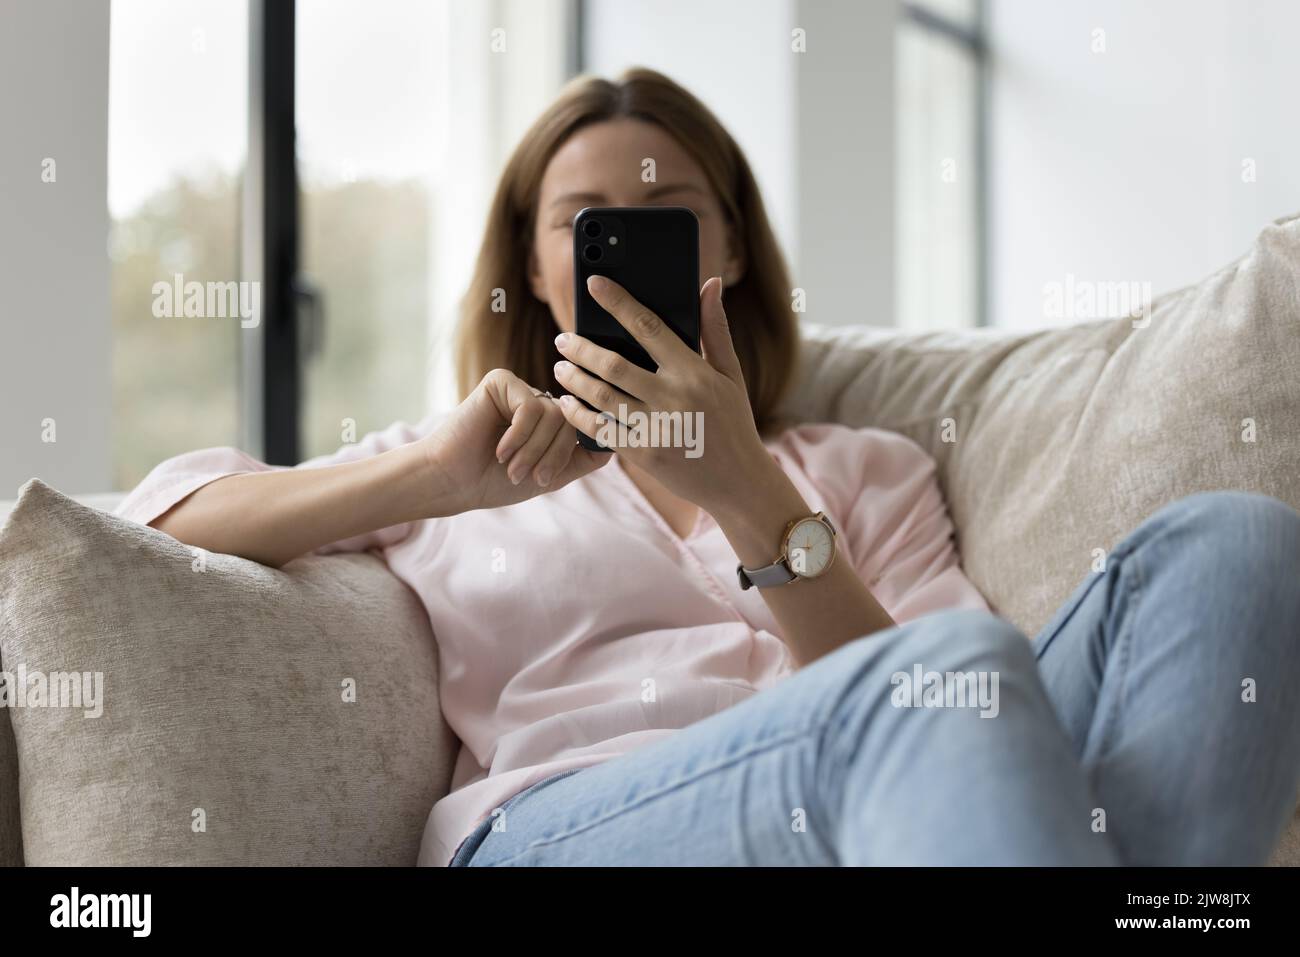 Young millennial unrecognizable smartphone user woman resting on home sofa Stock Photo